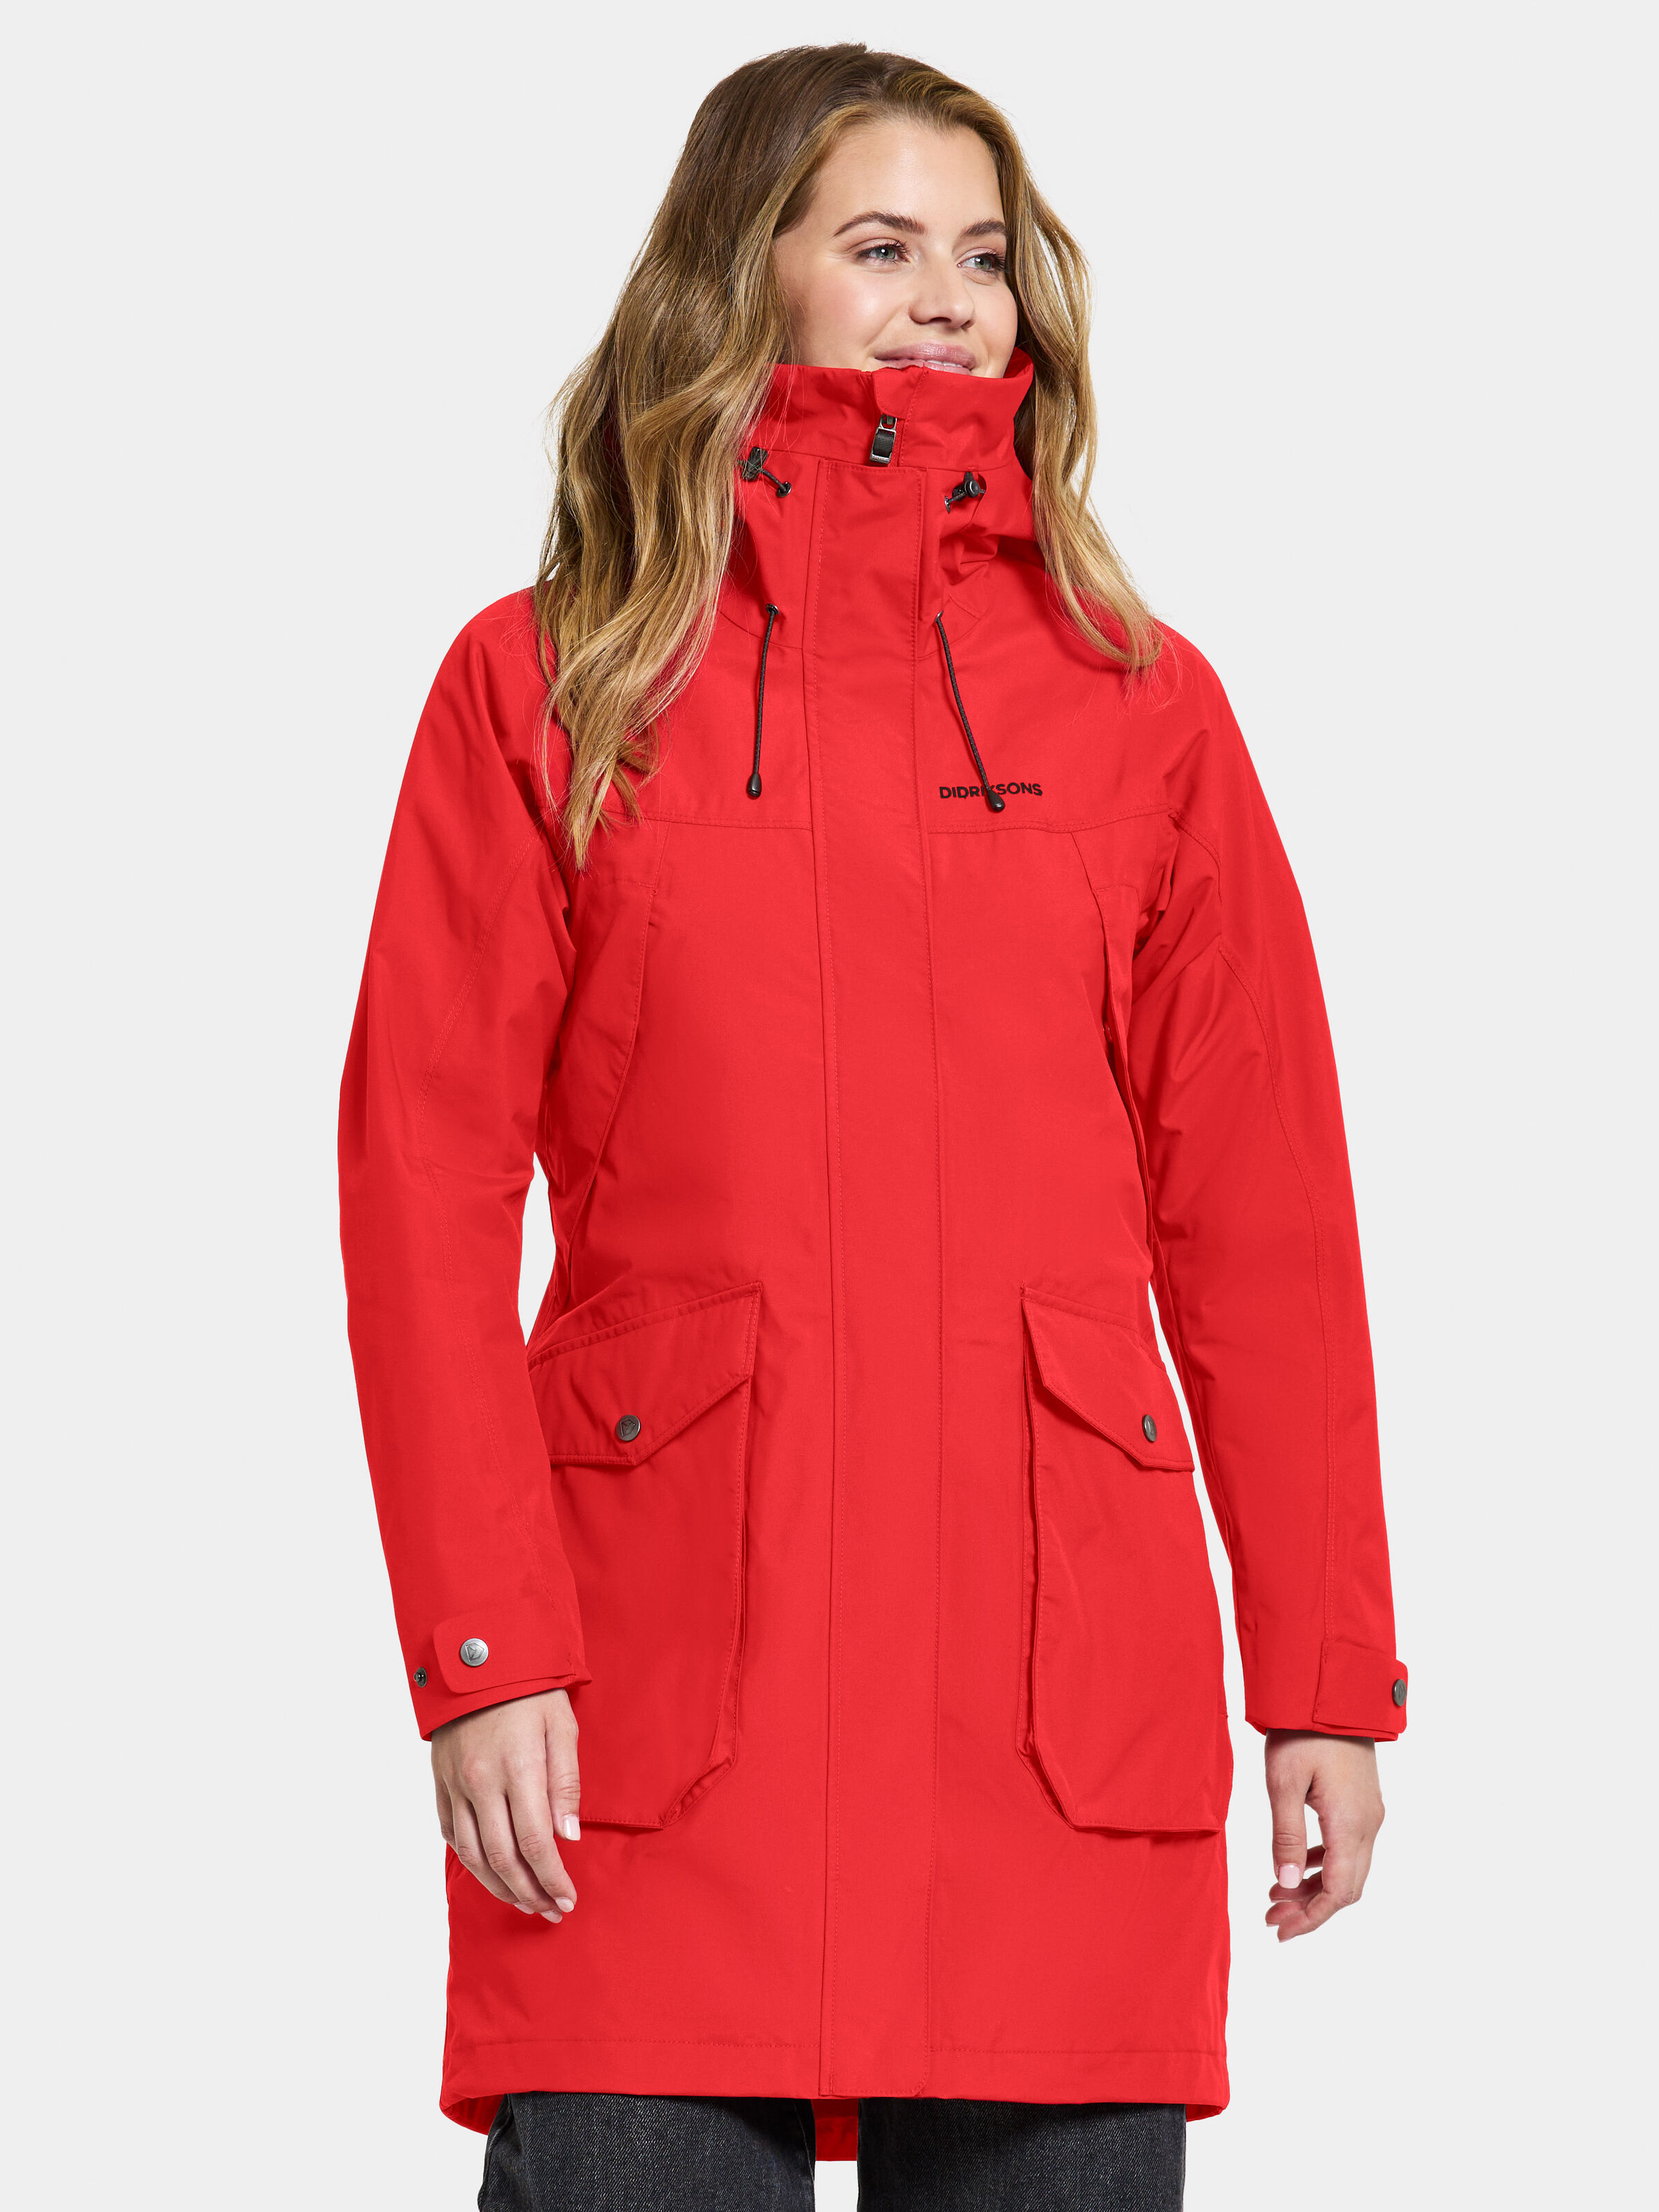 Didriksons Thelma Waterproof Red Parka: Pomme